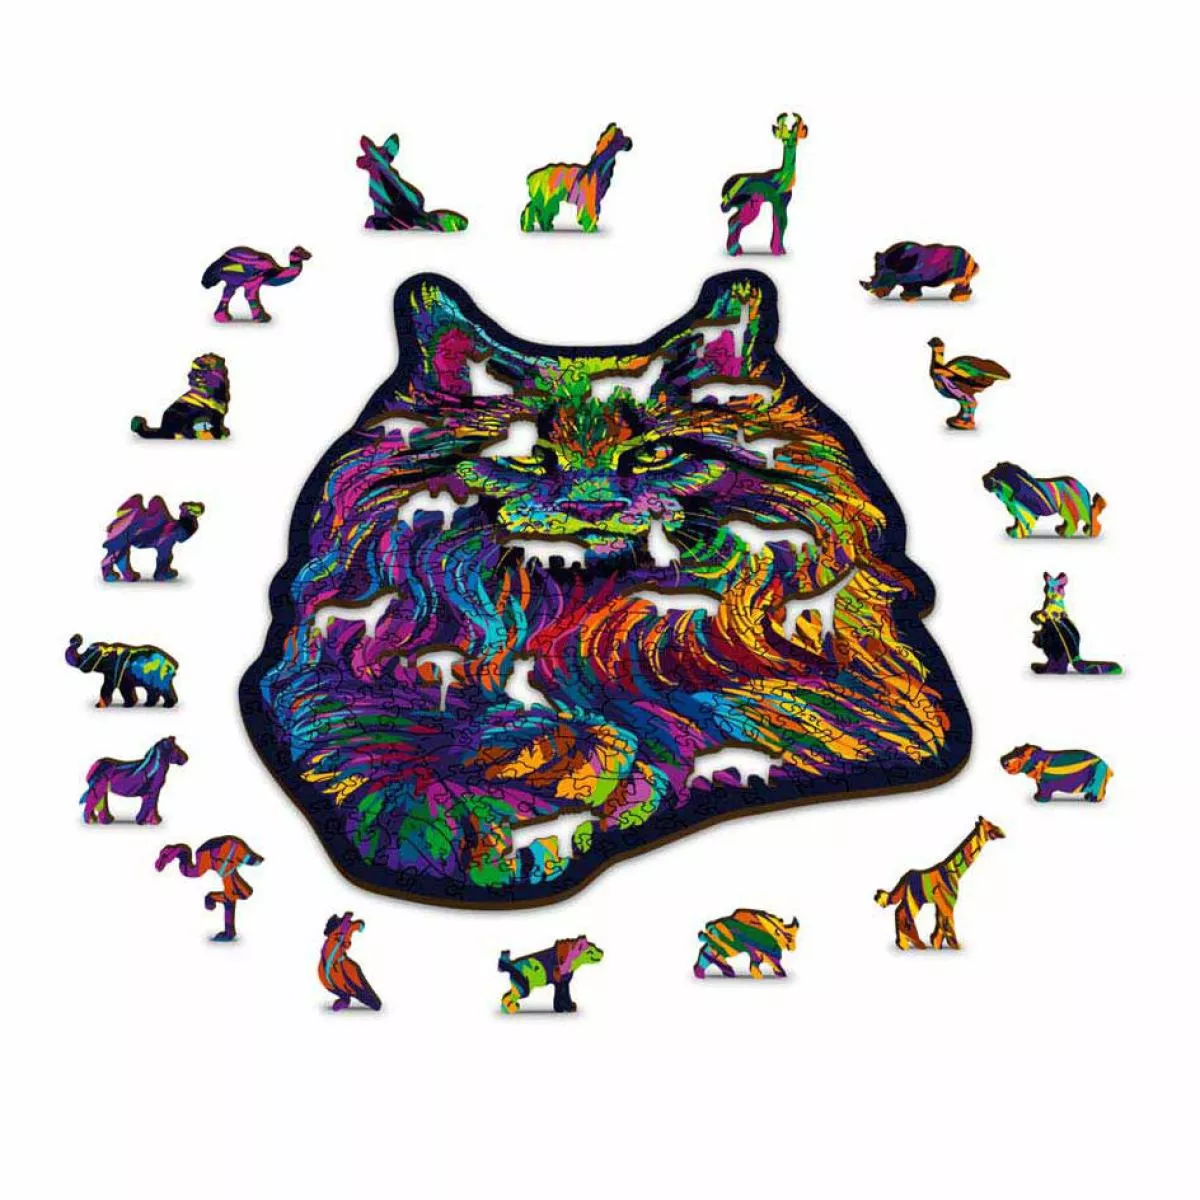 Colorful Puzzle "Rainbow Cat" made of Wood – 140 parts, 20 shapes